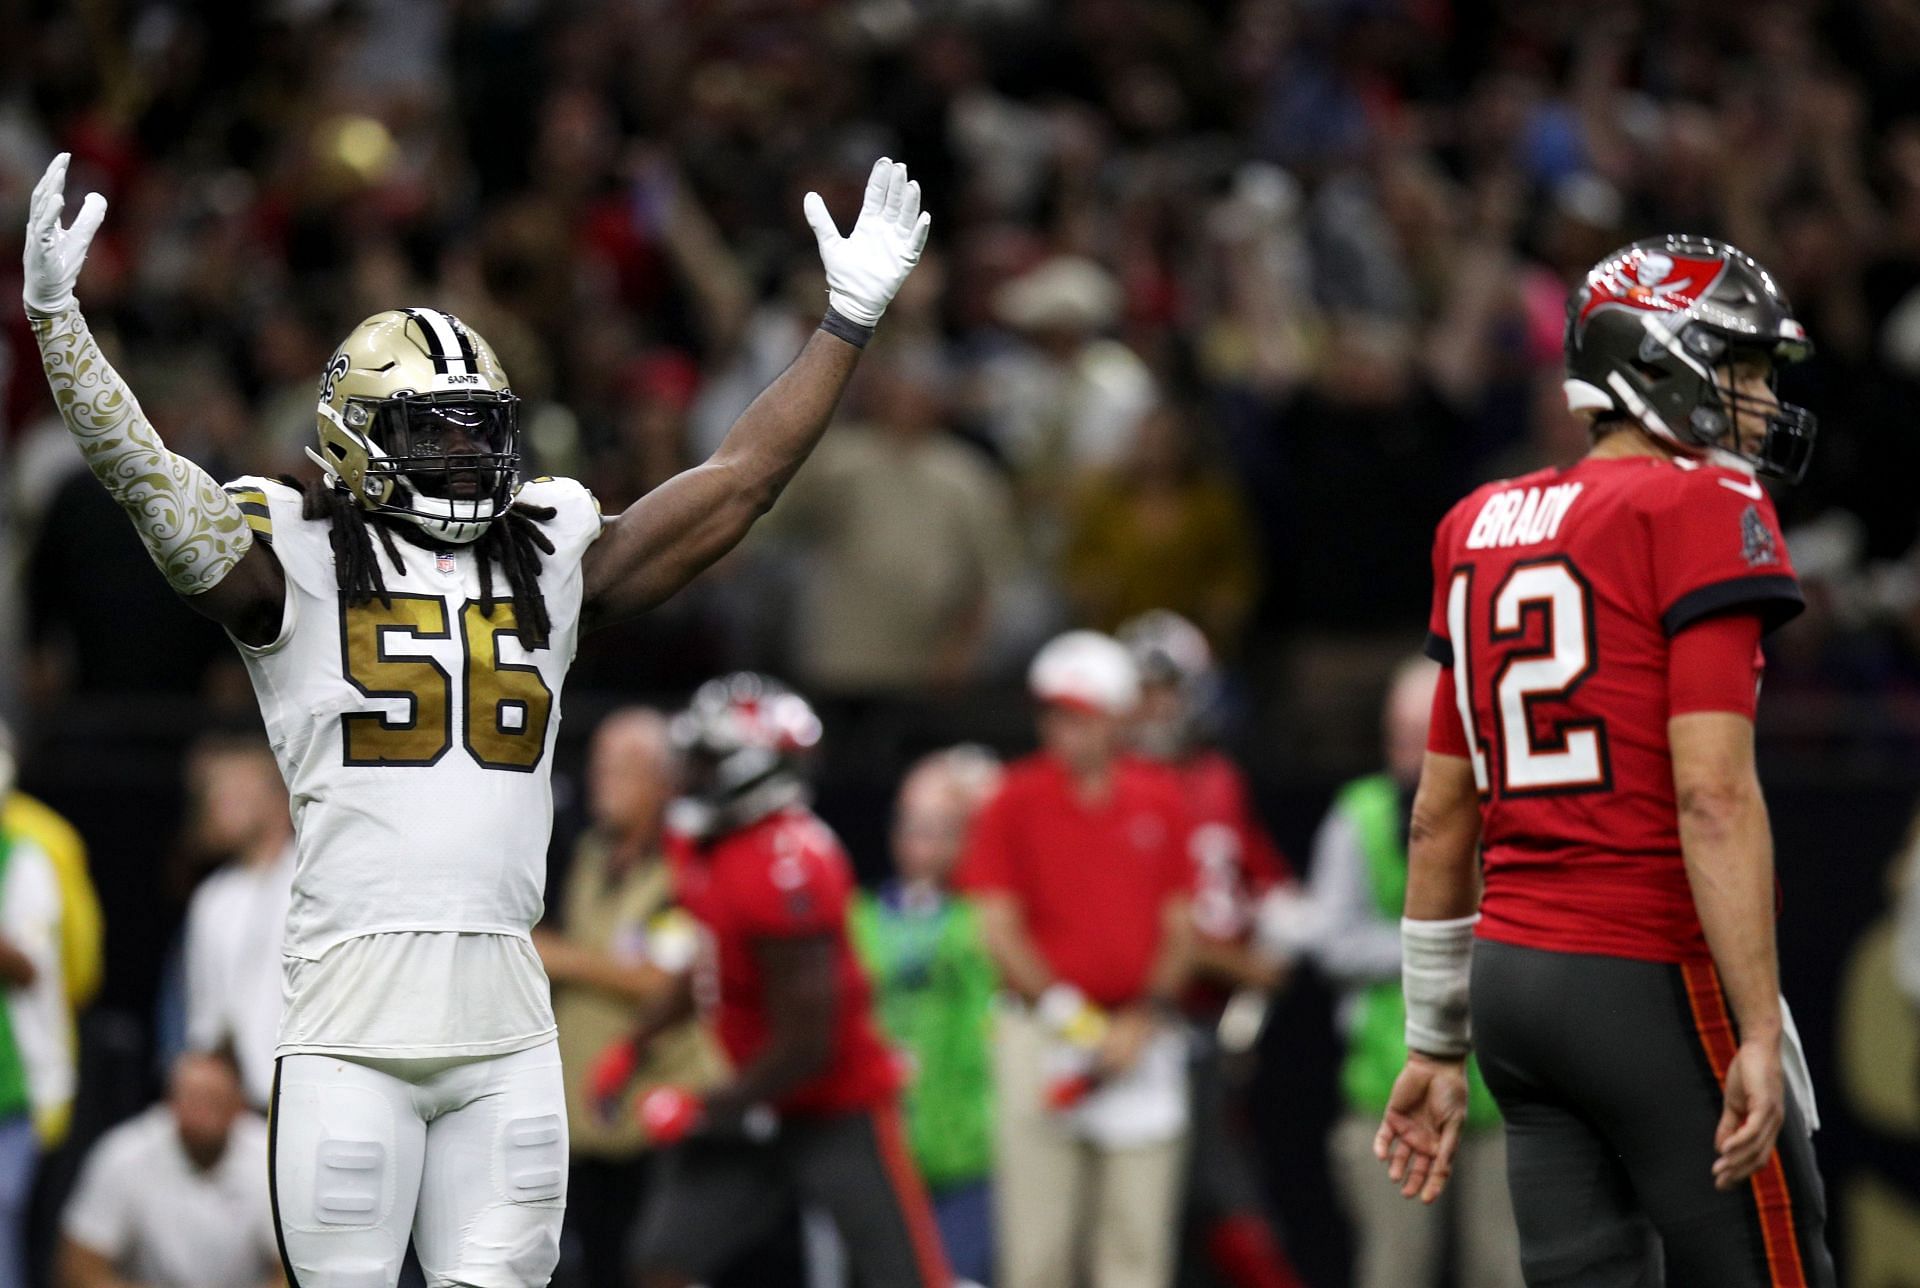 Tampa Bay Buccaneers vs. New Orleans Saints injury report and starting lineup - NFL Week 15 Sunday Night Football